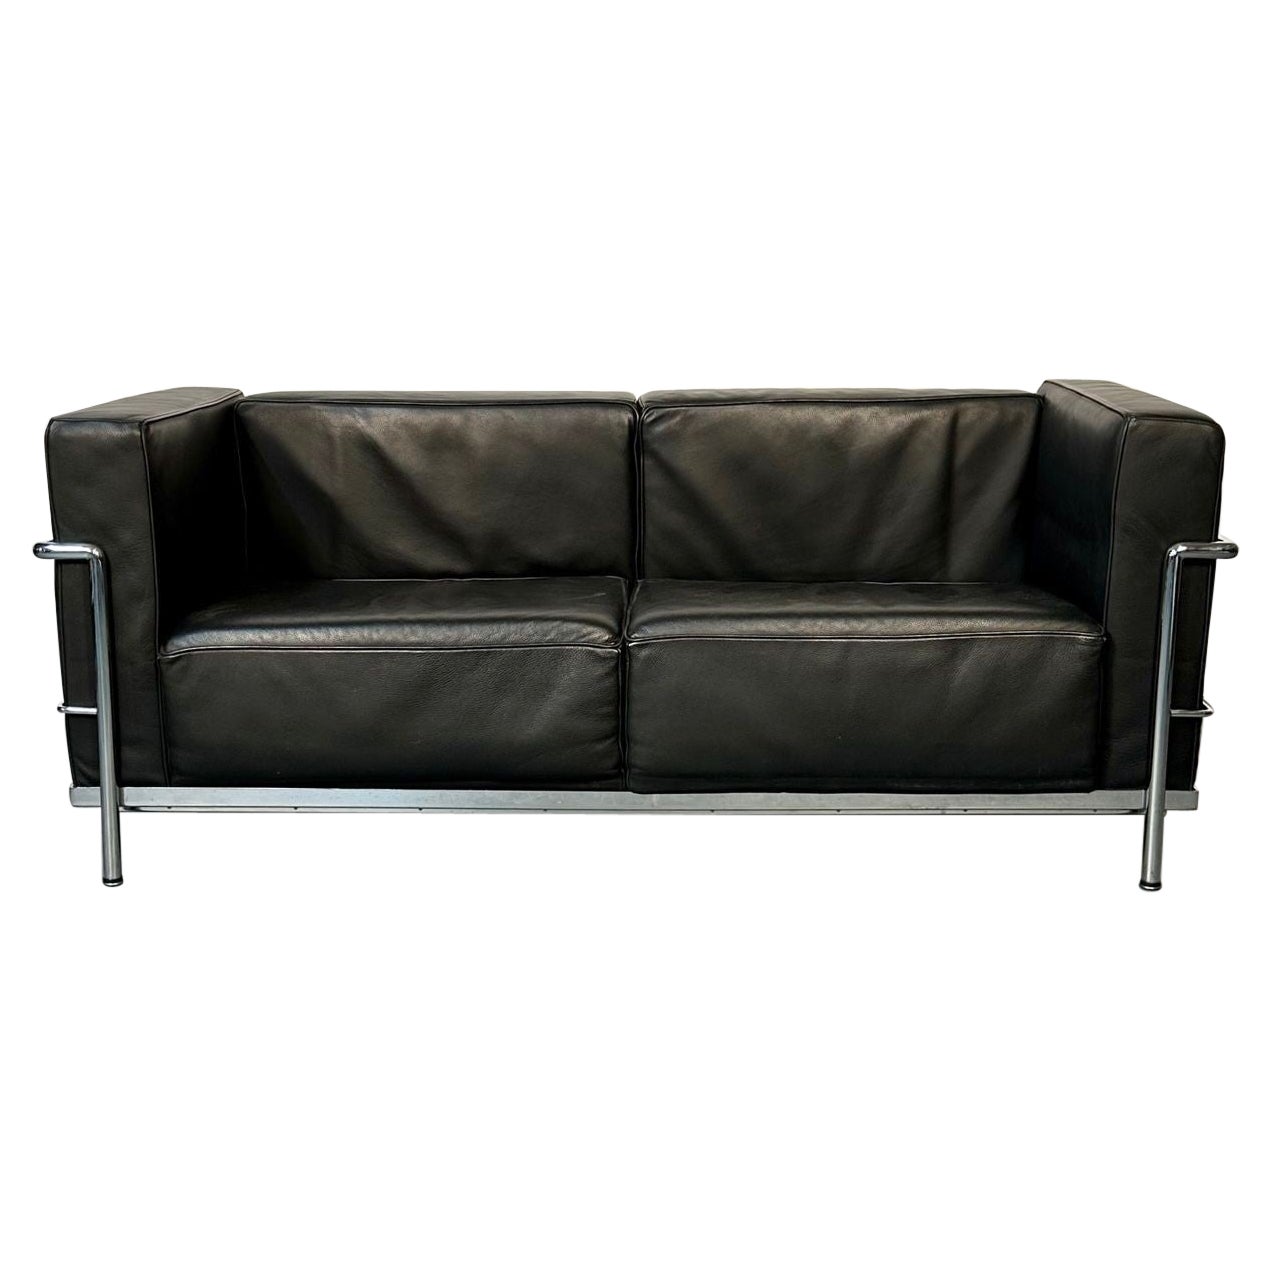 Mid-Century Modern LC2 Sofa by Le Corbusier, Black Leather, Two Seater, Perriand